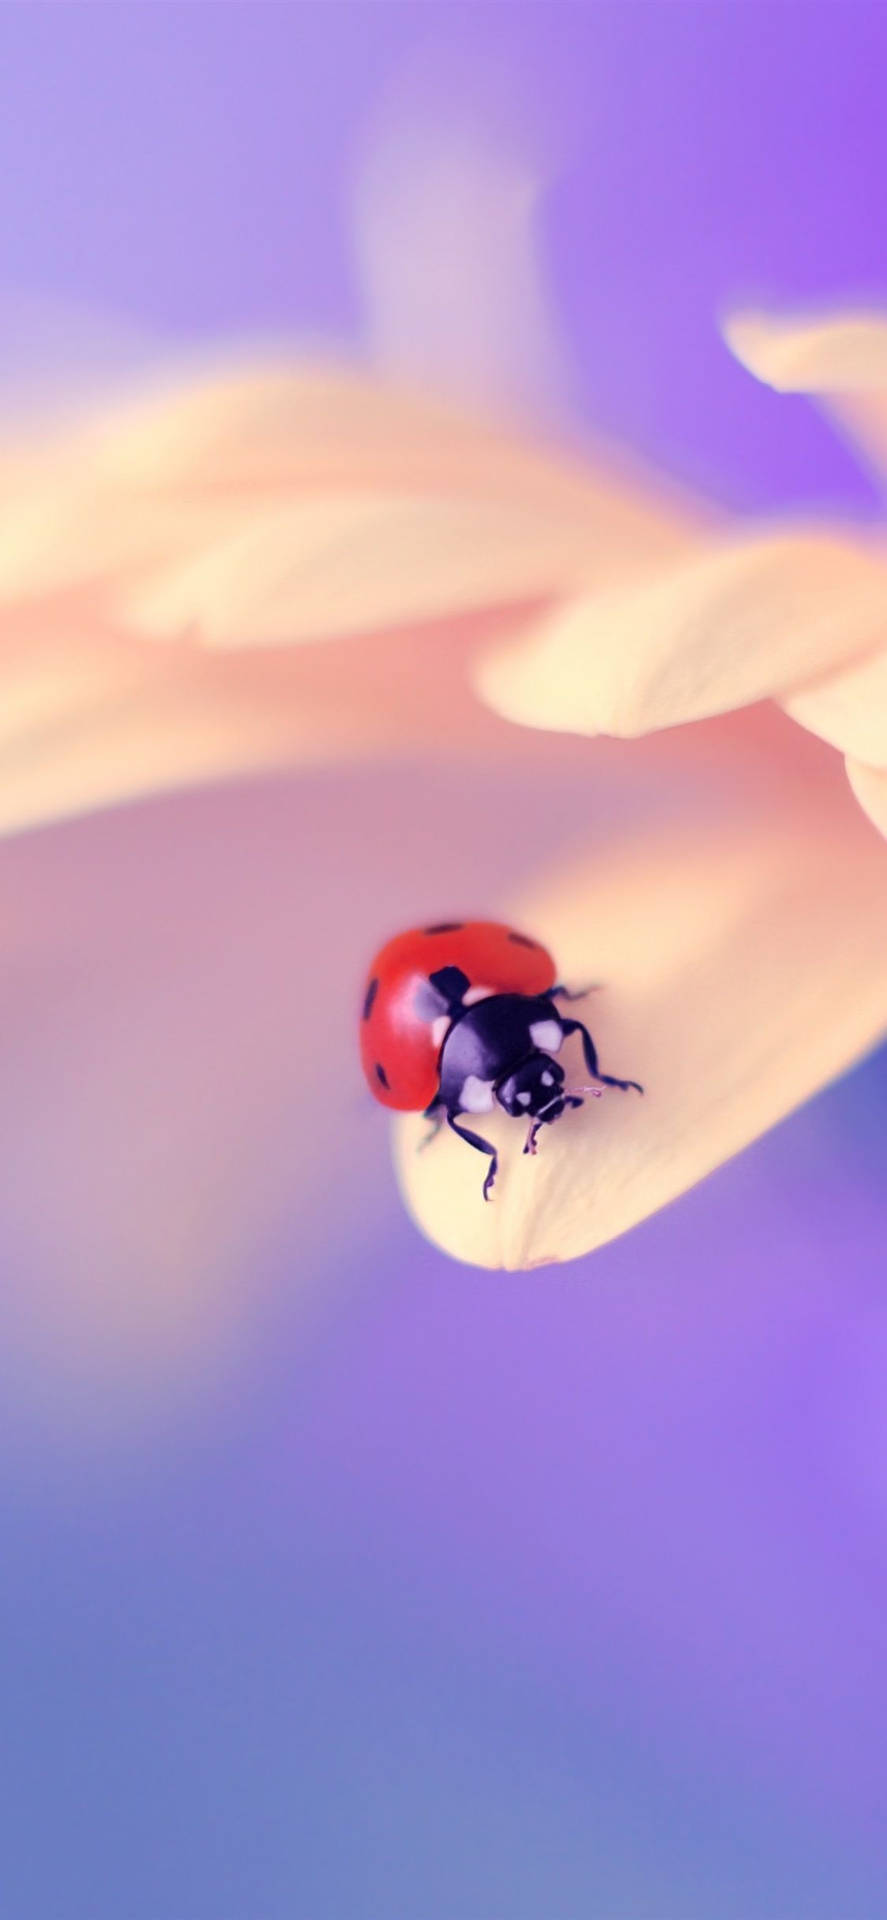 Ladybug Beetle Insect On A Flower Picture